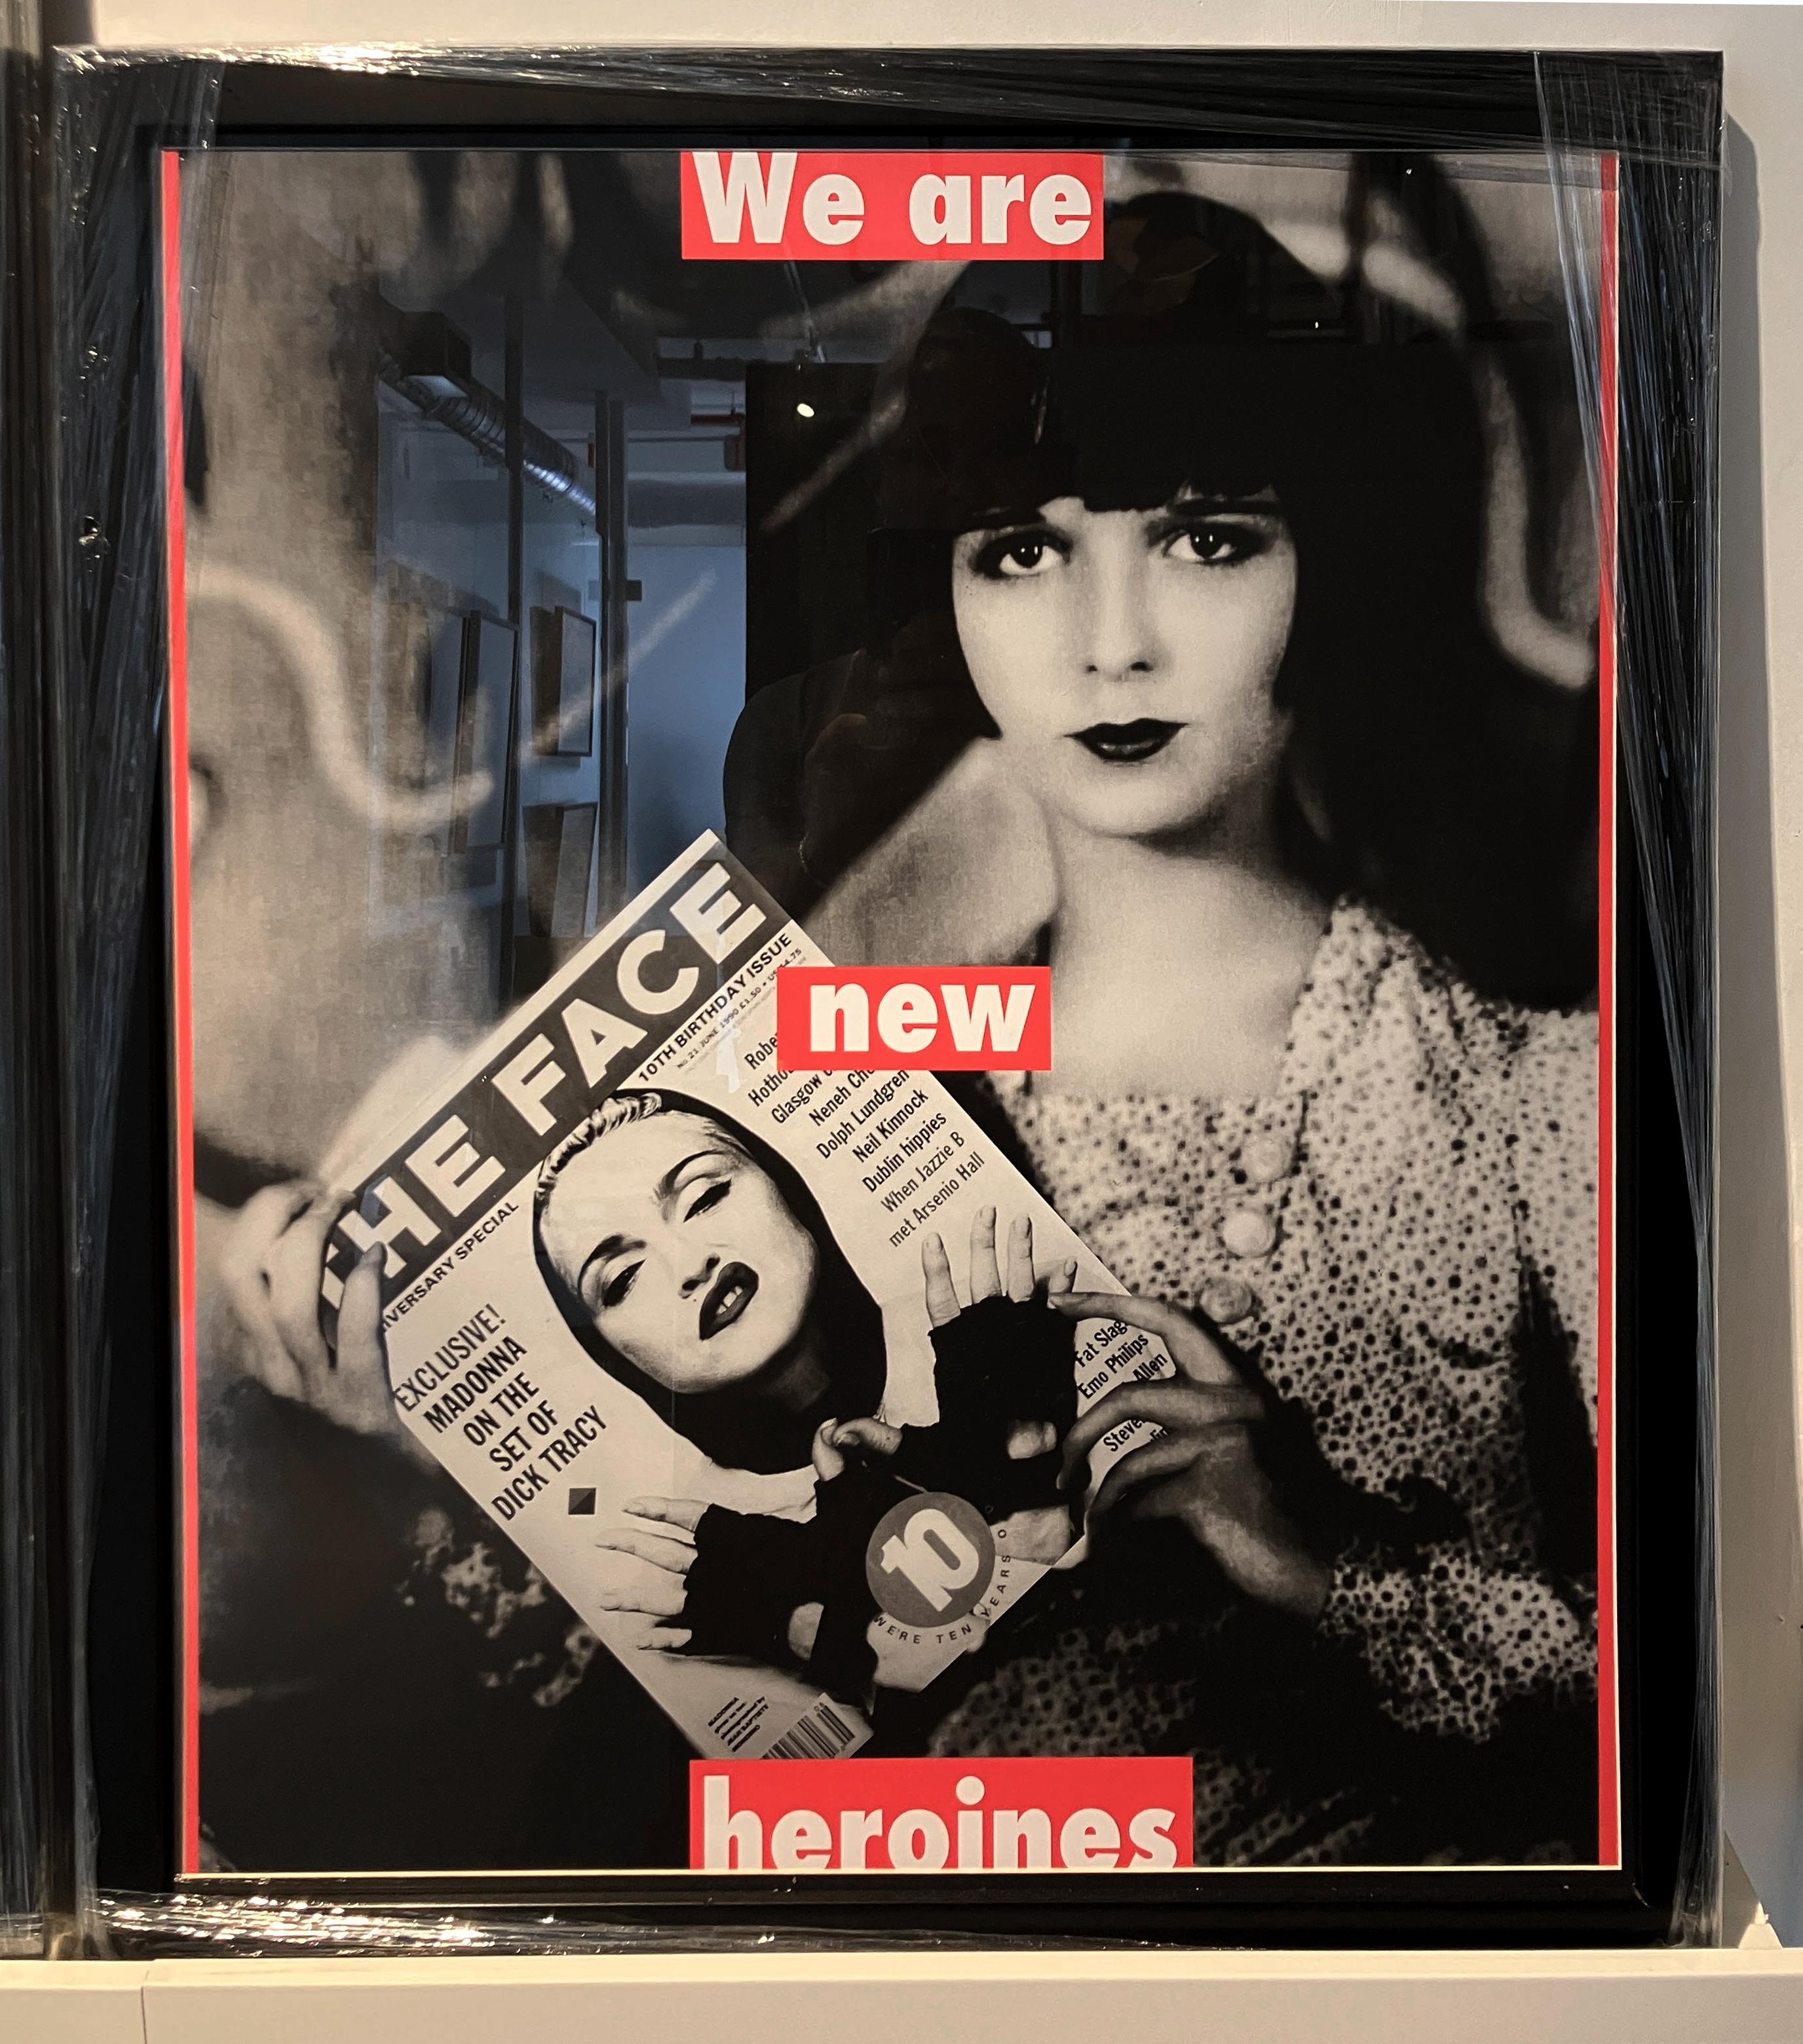 We are new heroines!. Homage to Louise Brooks and Barbara Kruger. Photorgraph - Contemporary Photograph by Paloma Castello